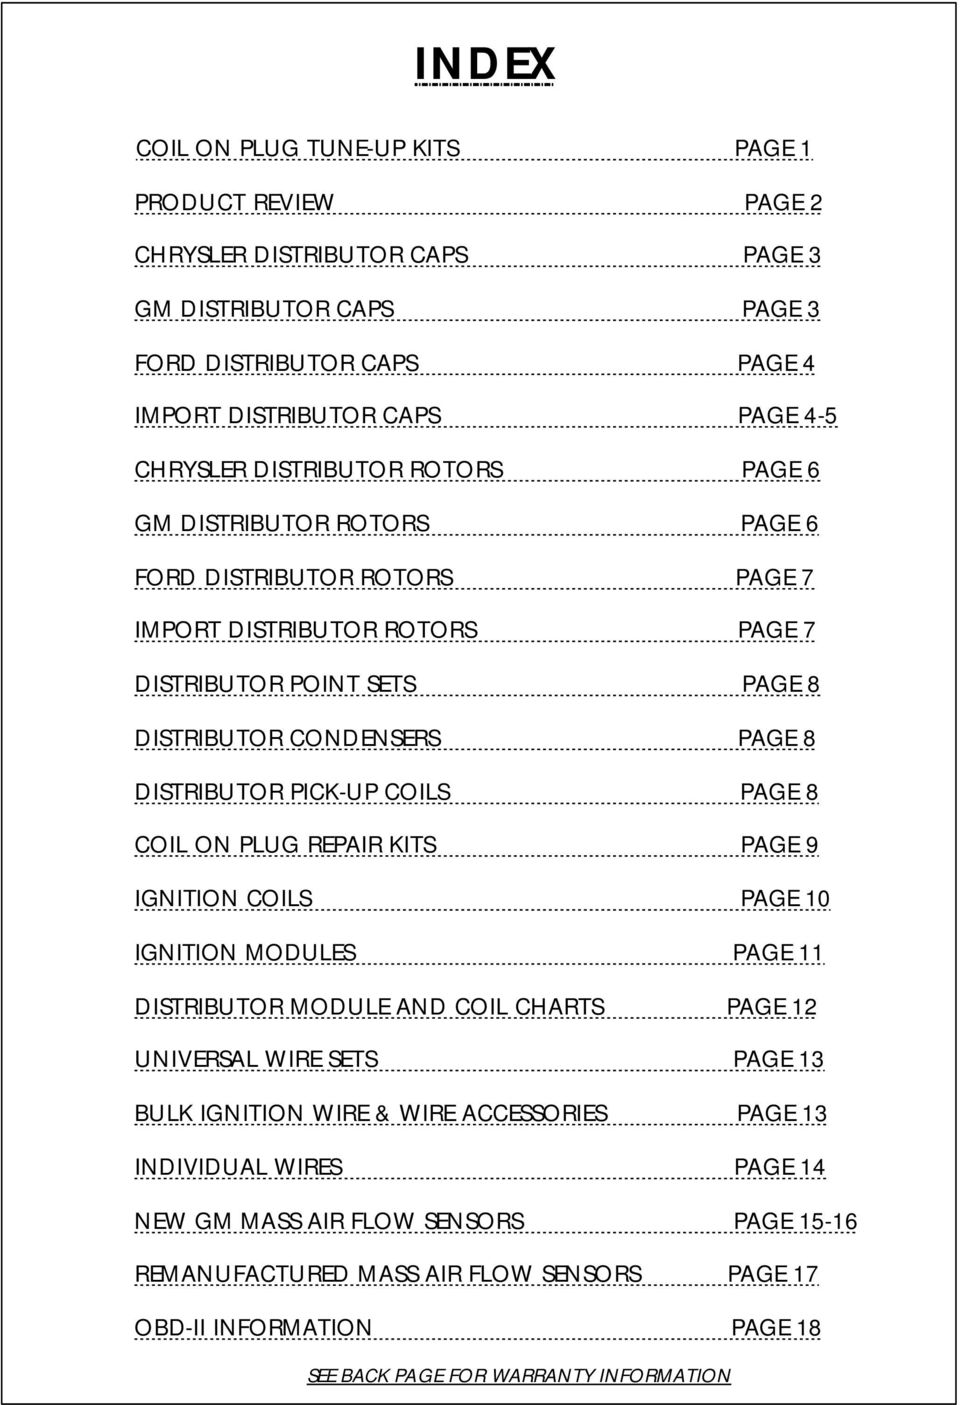 1995 Cadillac Deville 4.9L Wiring Diagram To Dlc from docplayer.net